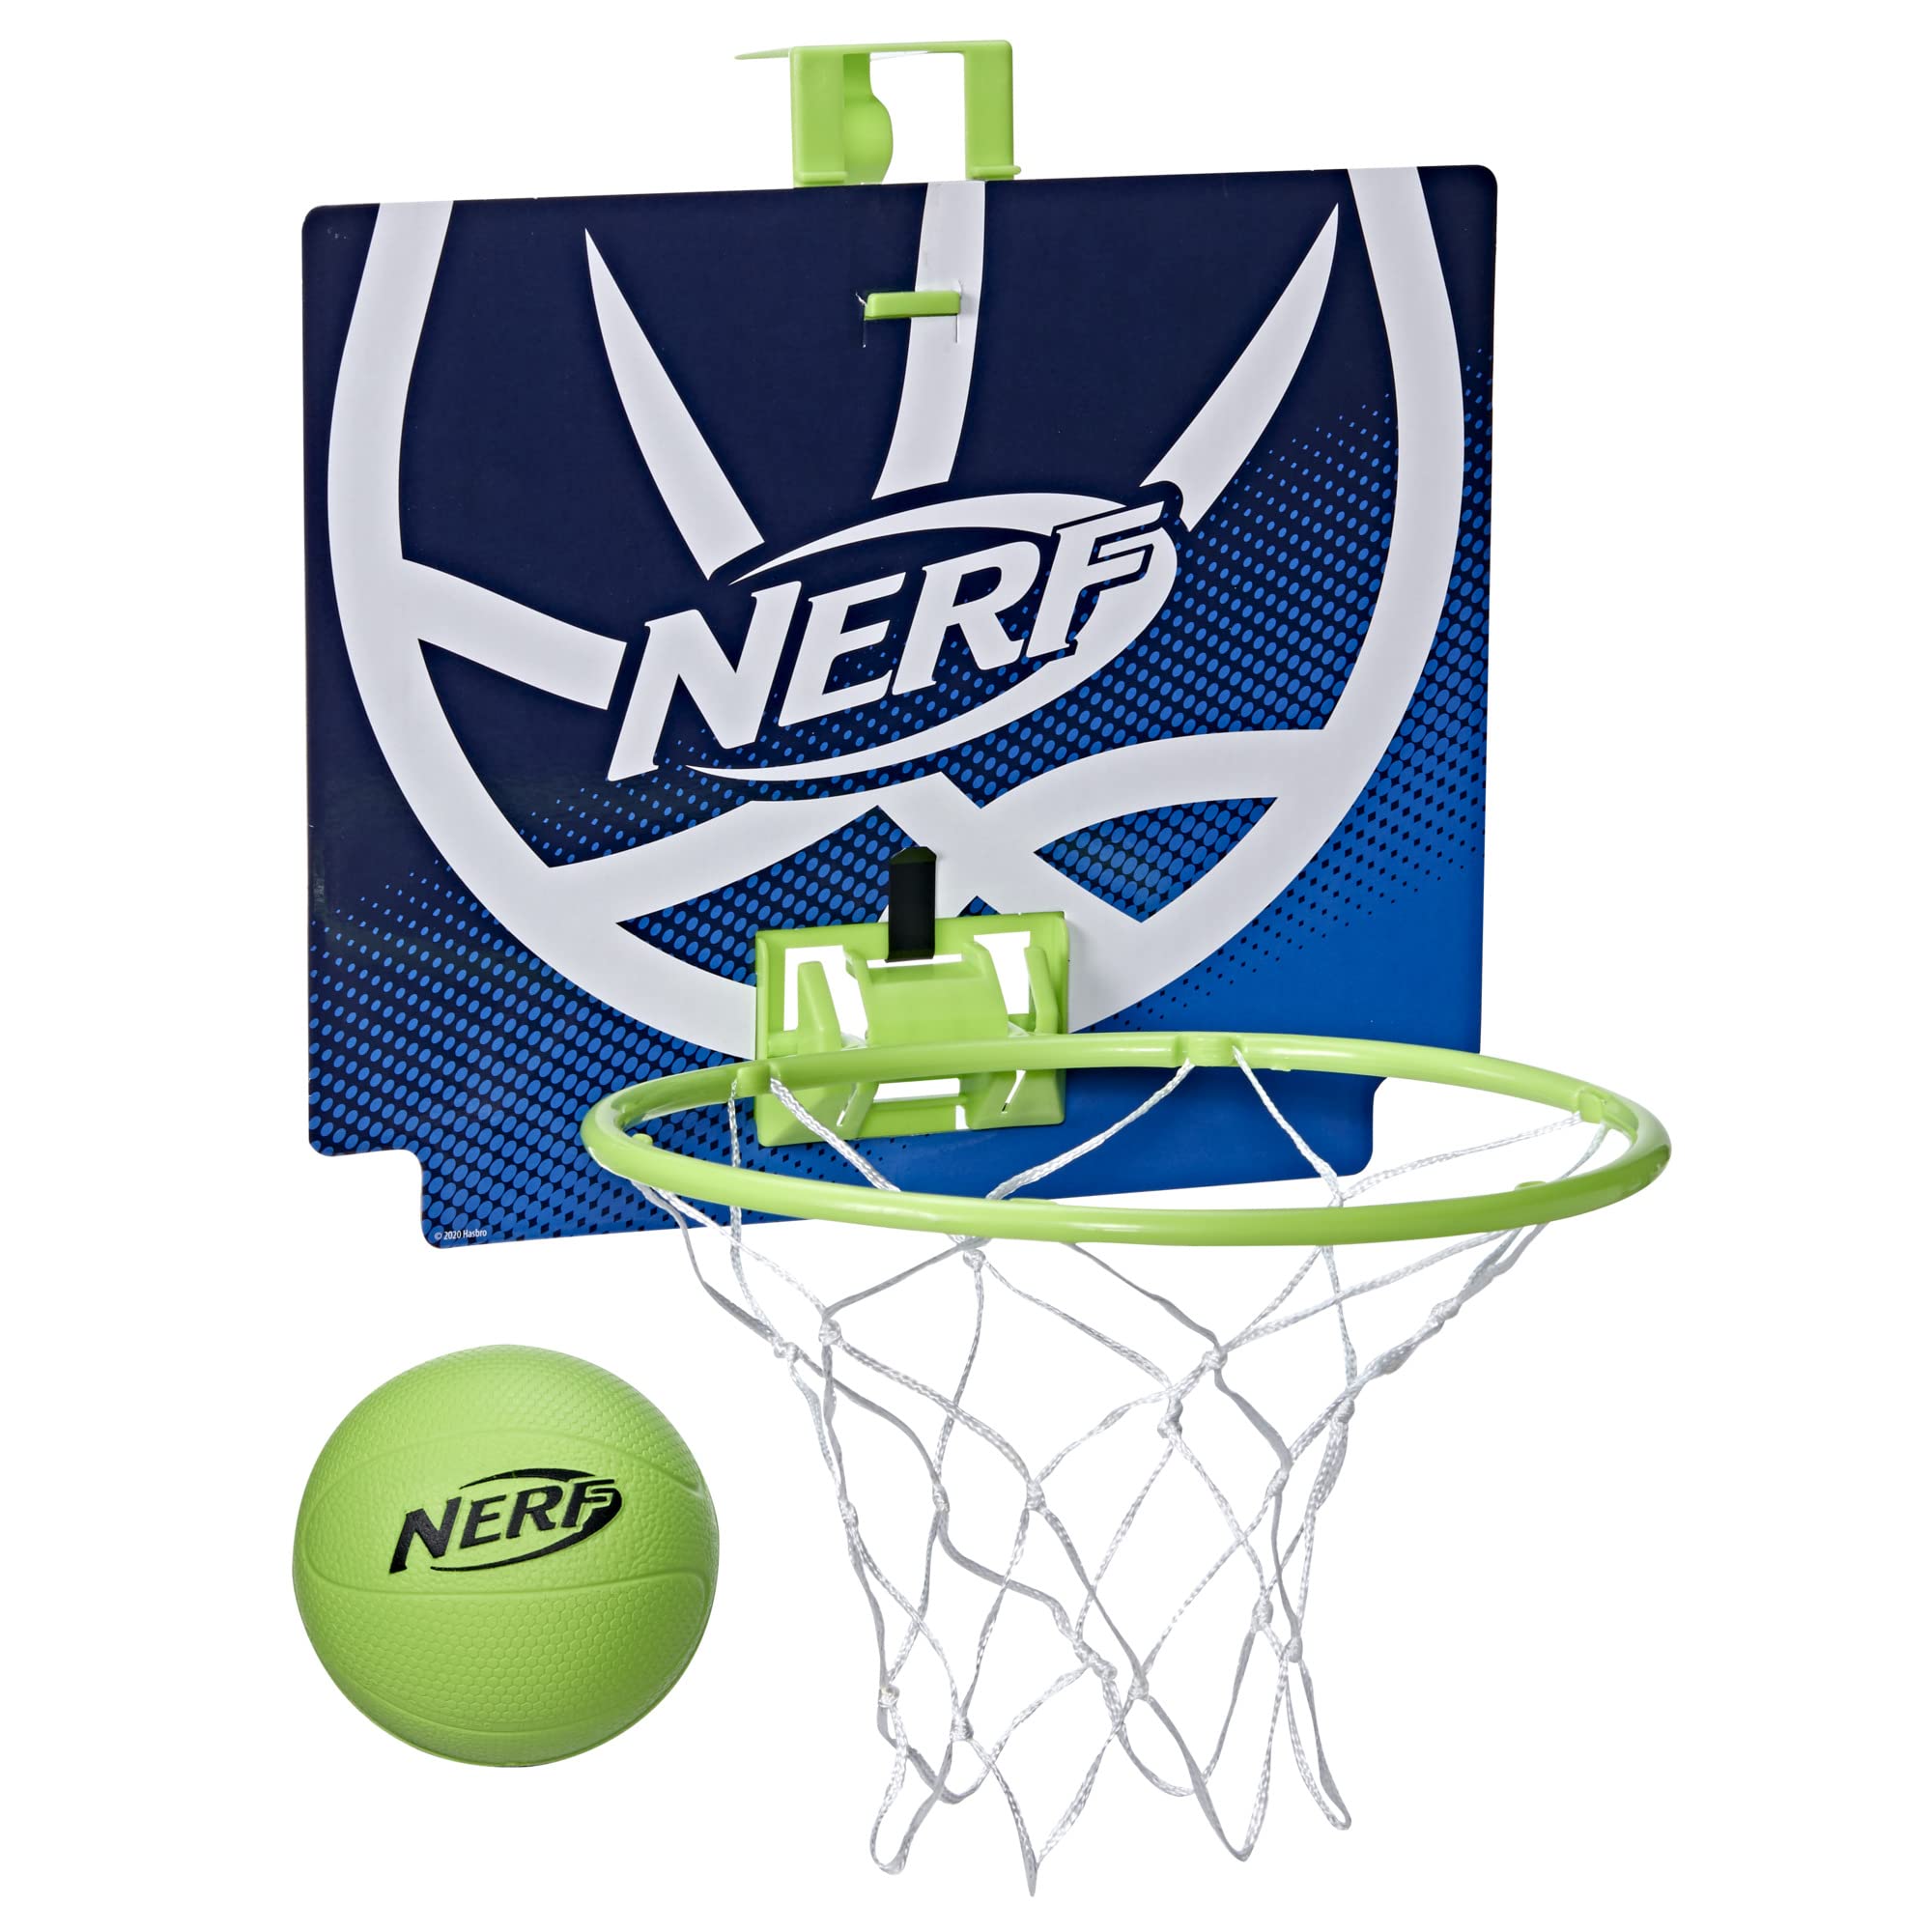 NERF Nerfoop -- The classic Mini Foam Basketball and Hoop -- Hooks On Doors -- Indoor and Outdoor Play -- A Favorite Since 1972 